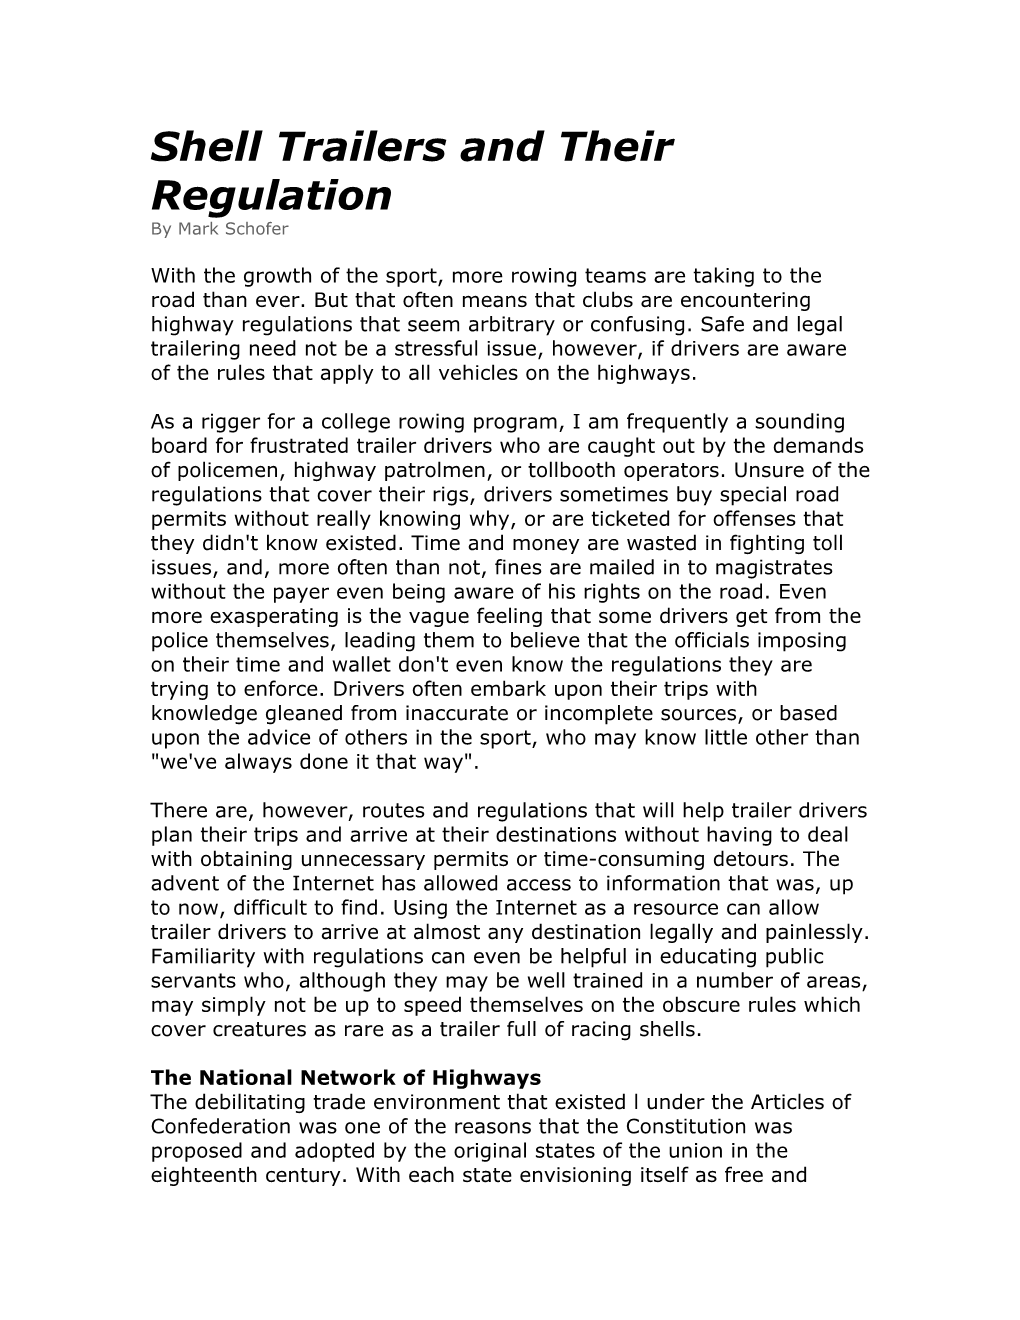 Shell Trailers and Their Regulation